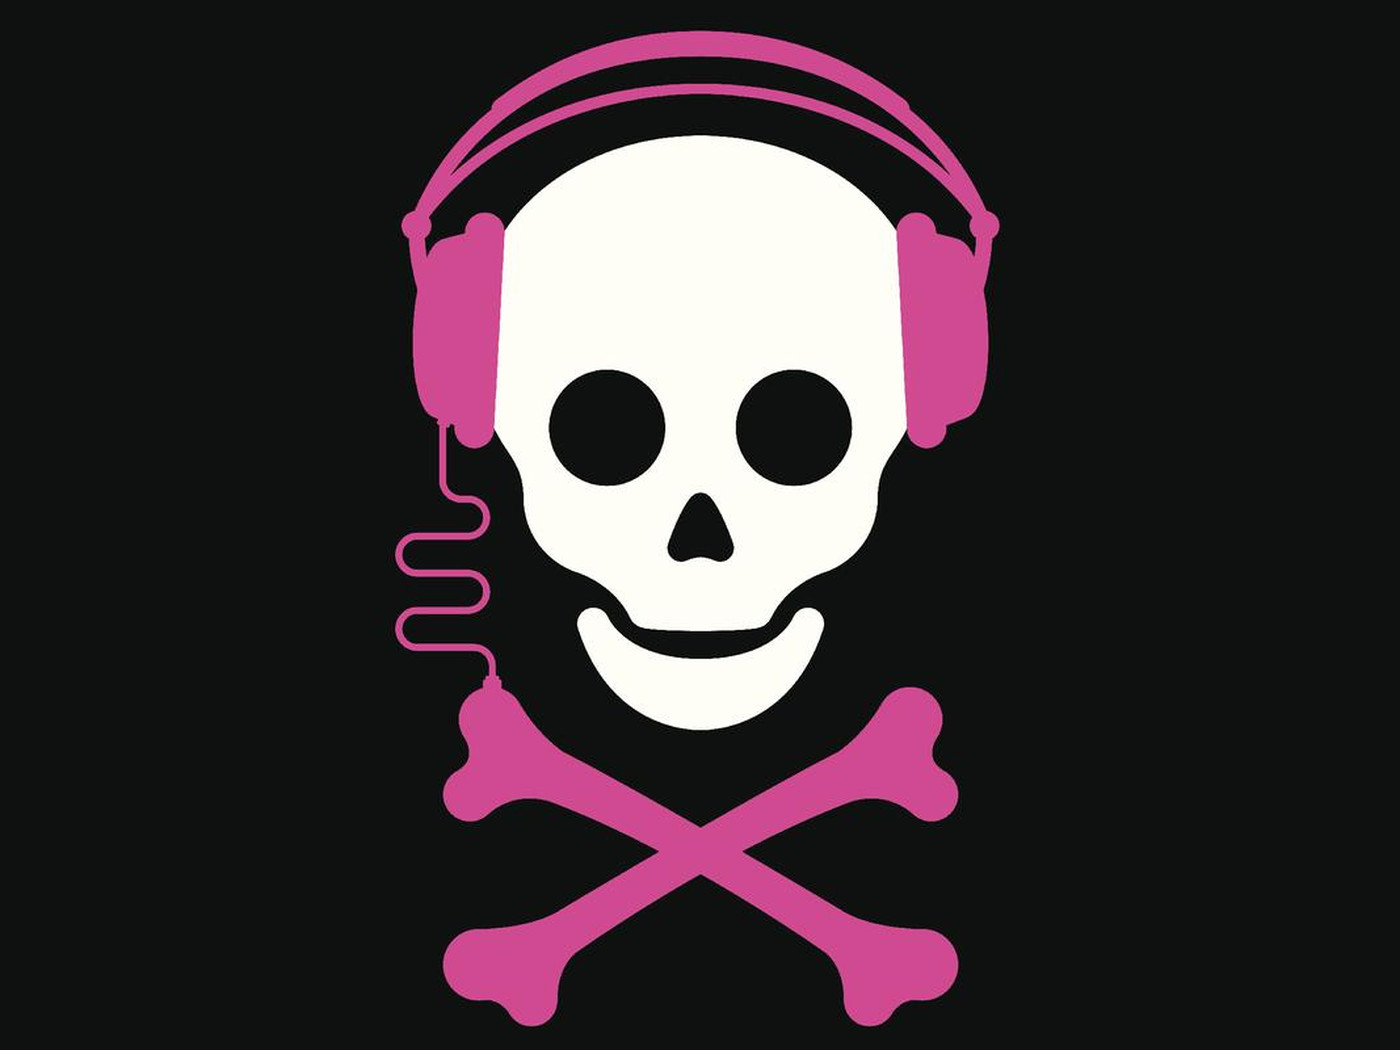 Why Downloading Pirated MP3 Music Is A Bad Idea? These 6 Reasons Will Change Your Mind!